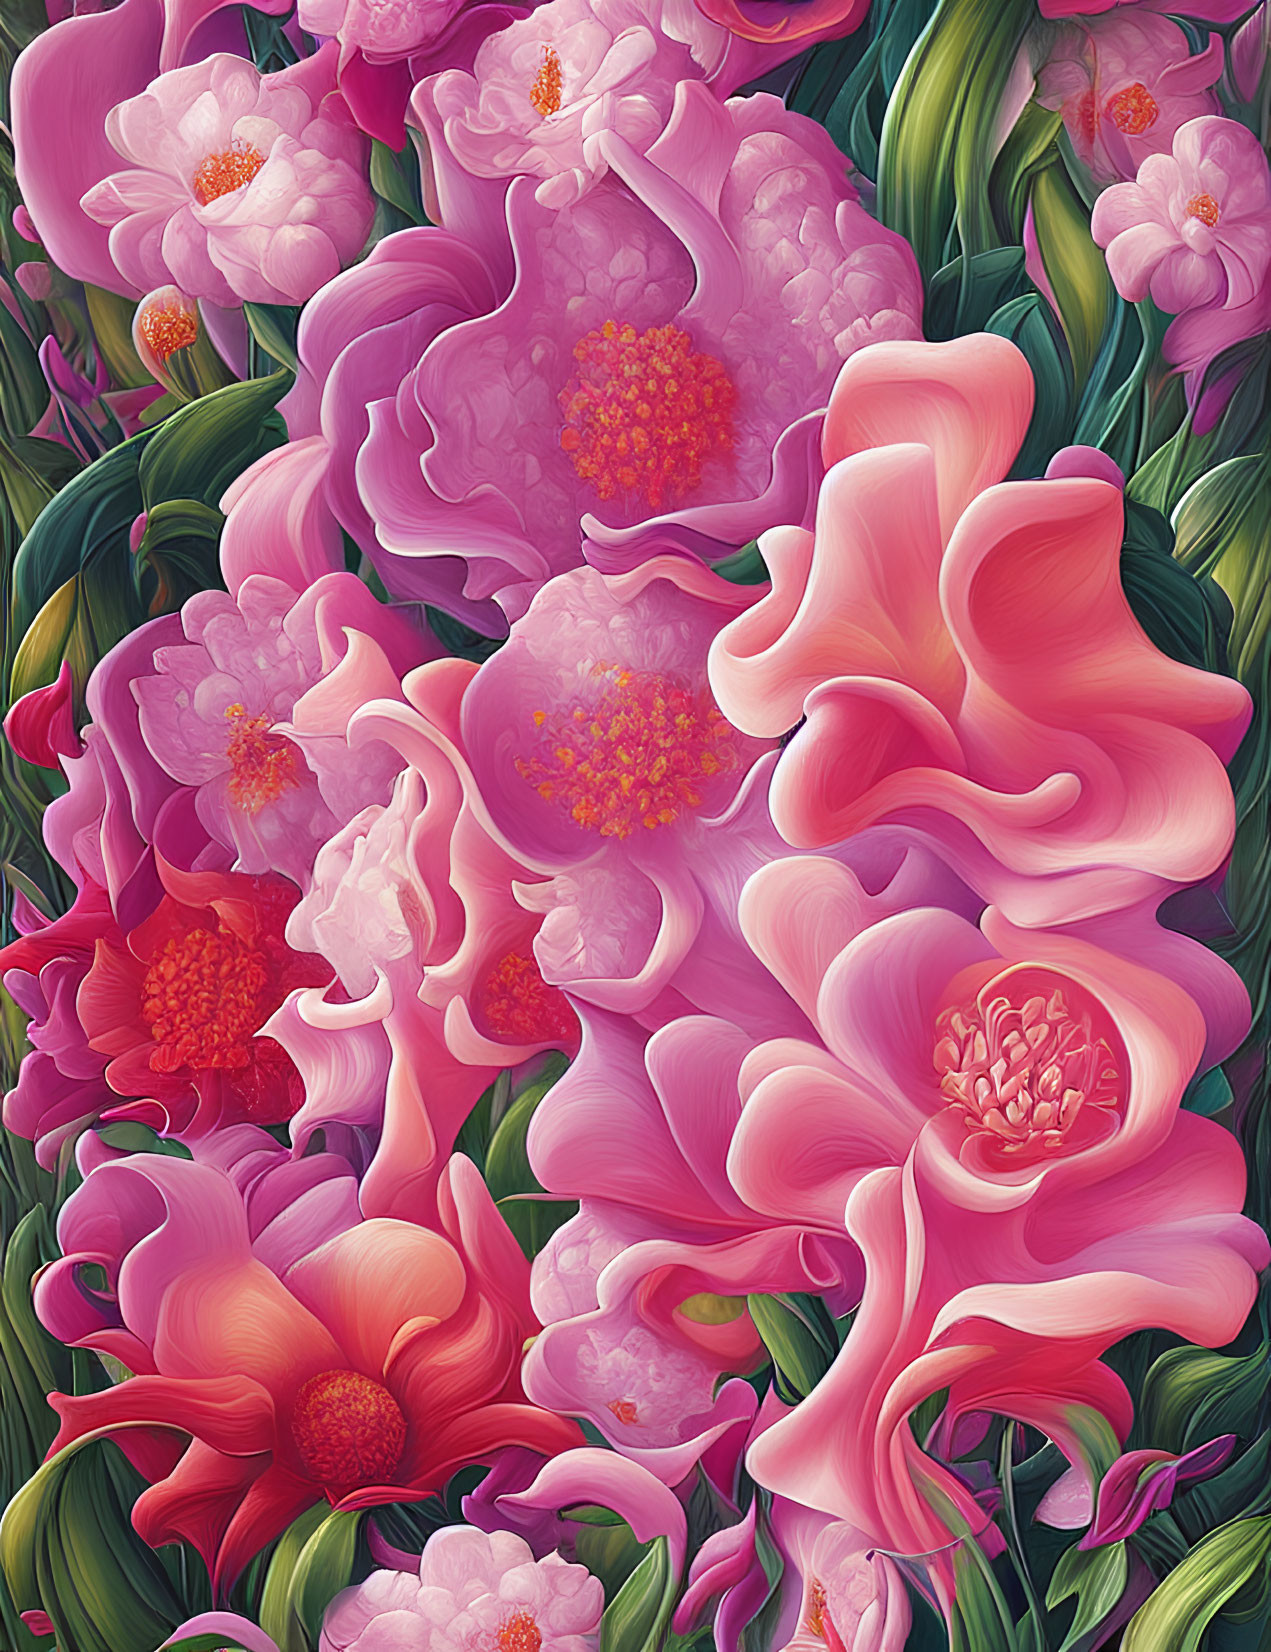 Colorful floral artwork with intricate pink petals and green foliage